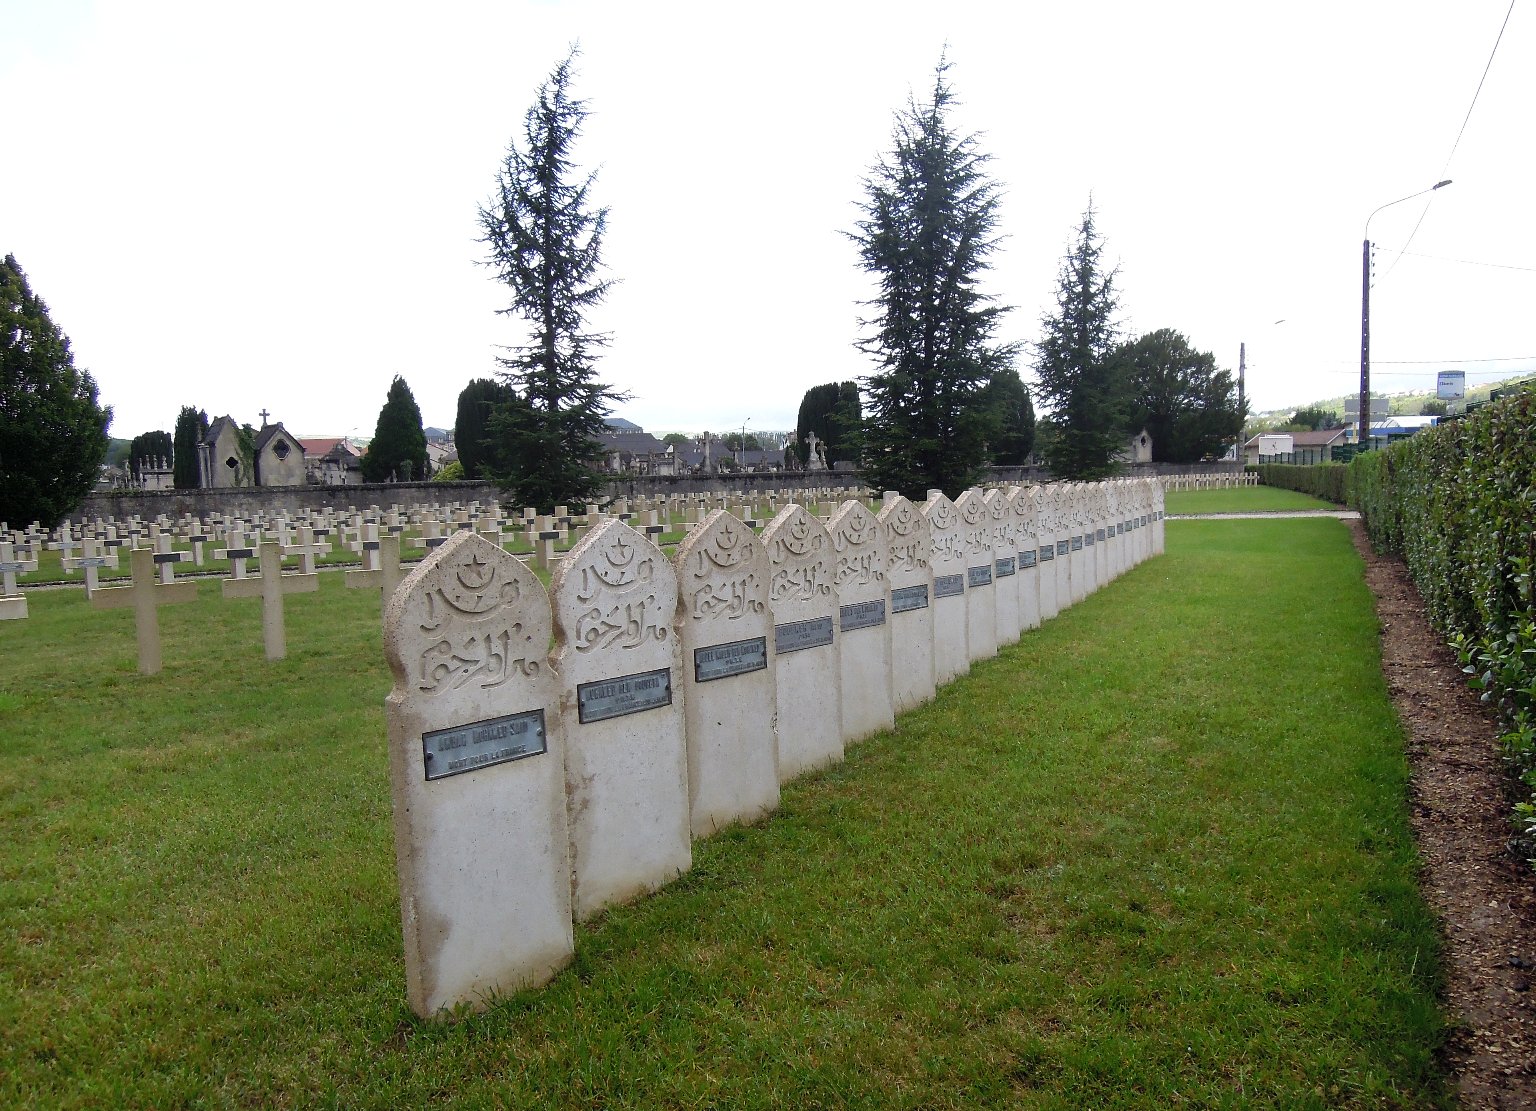 National Military Cemetery